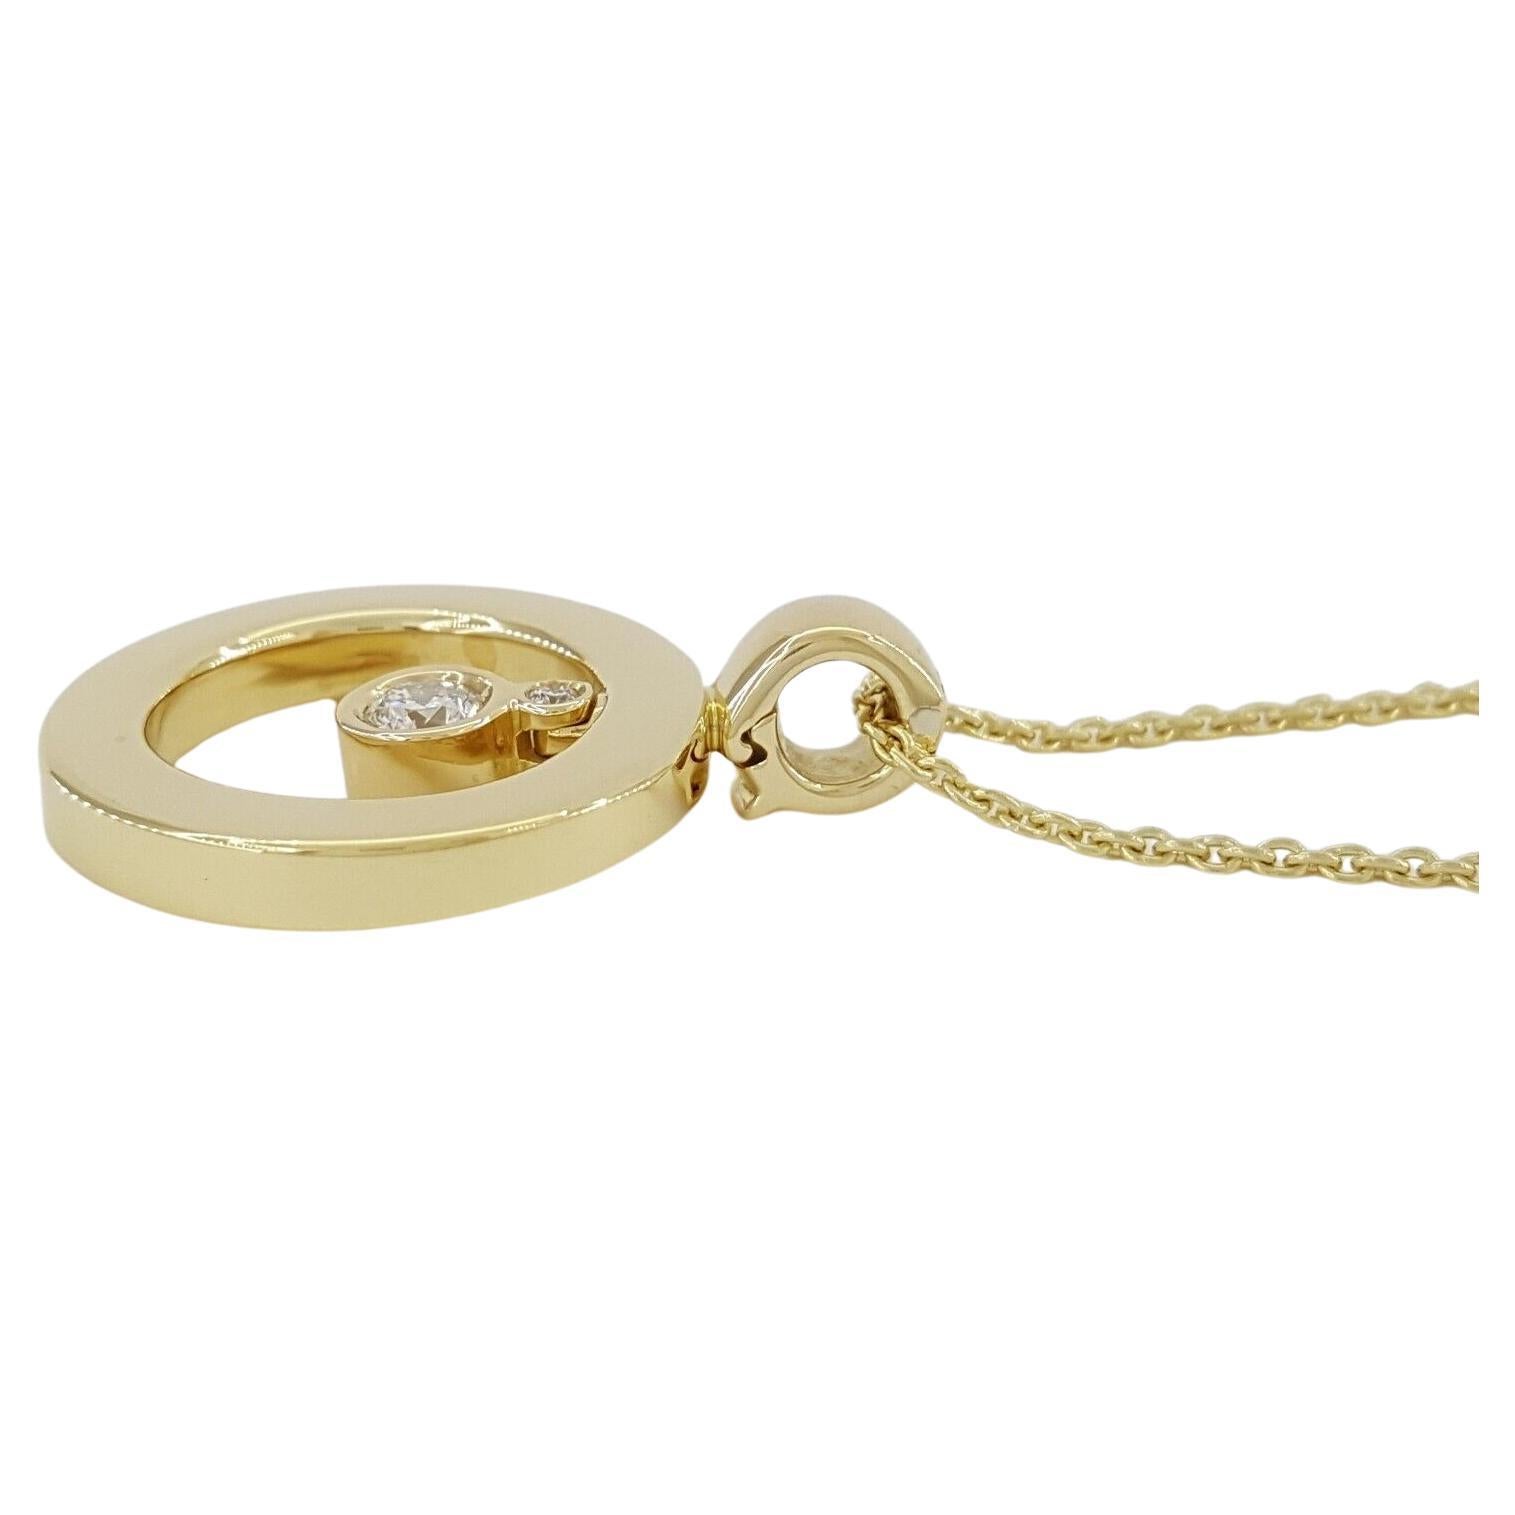 This 18K Yellow Gold pendant and chain set from Roberto Coin features a Shiny Ceno Mini O design with a 24.7mm diameter (18.5mm without bail), and a thickness of 2.9mm. The pendant and chain together weigh 7 grams. The pendant showcases two Natural